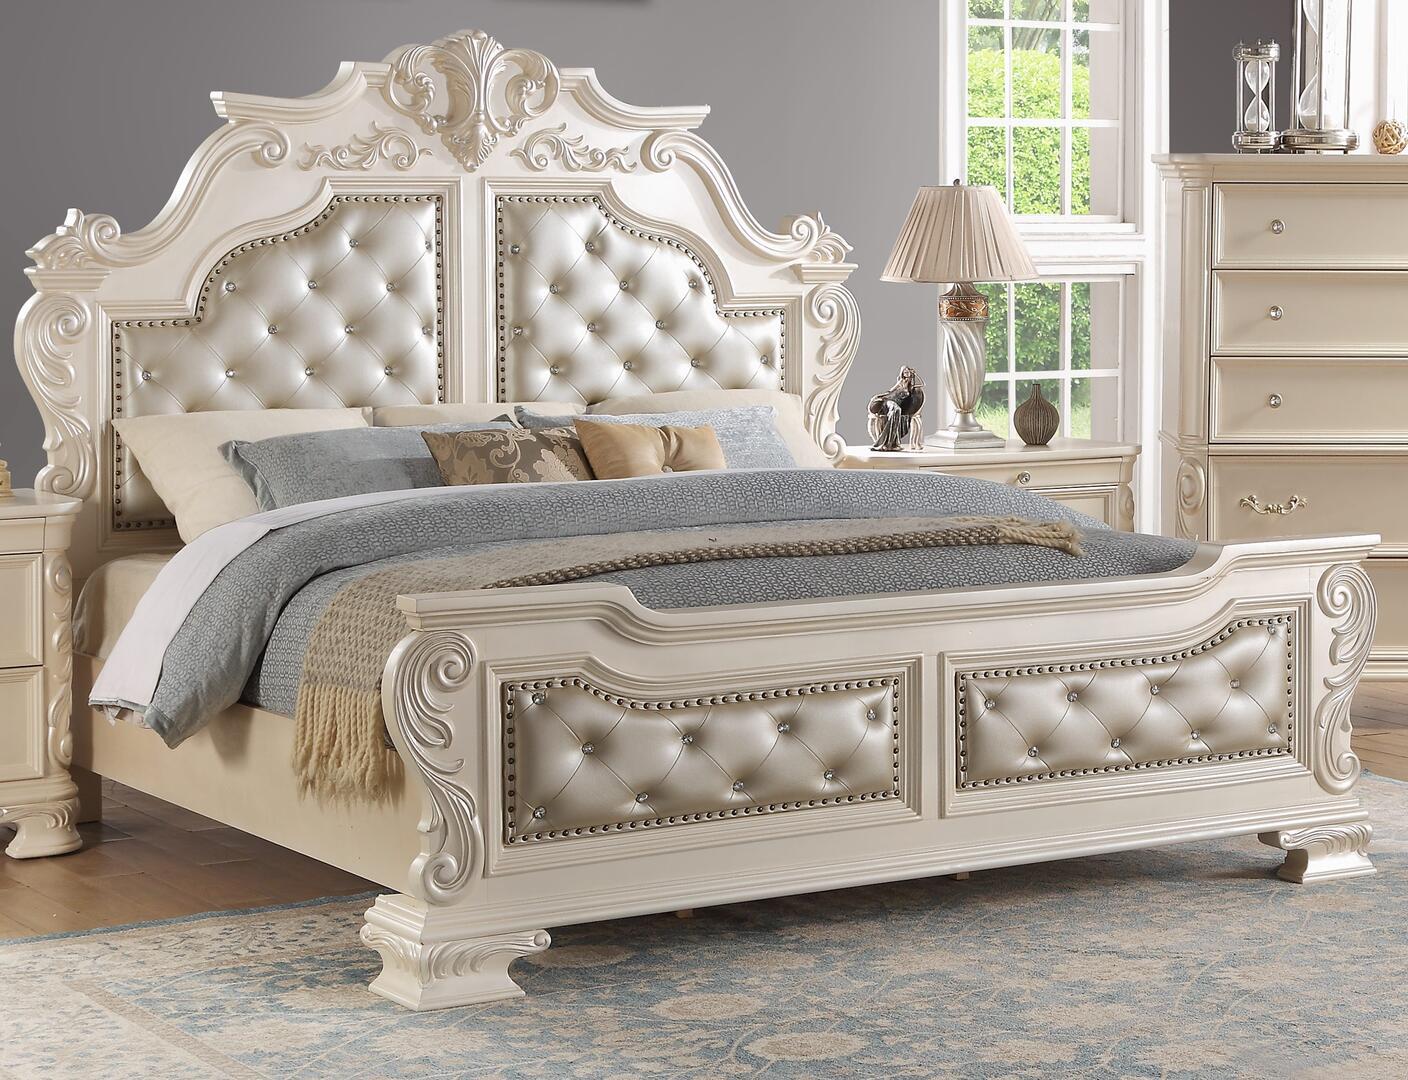 

    
Off-White Finish Wood Queen Panel Bedroom Set 6Pcs Traditional Cosmos Furniture Victoria
